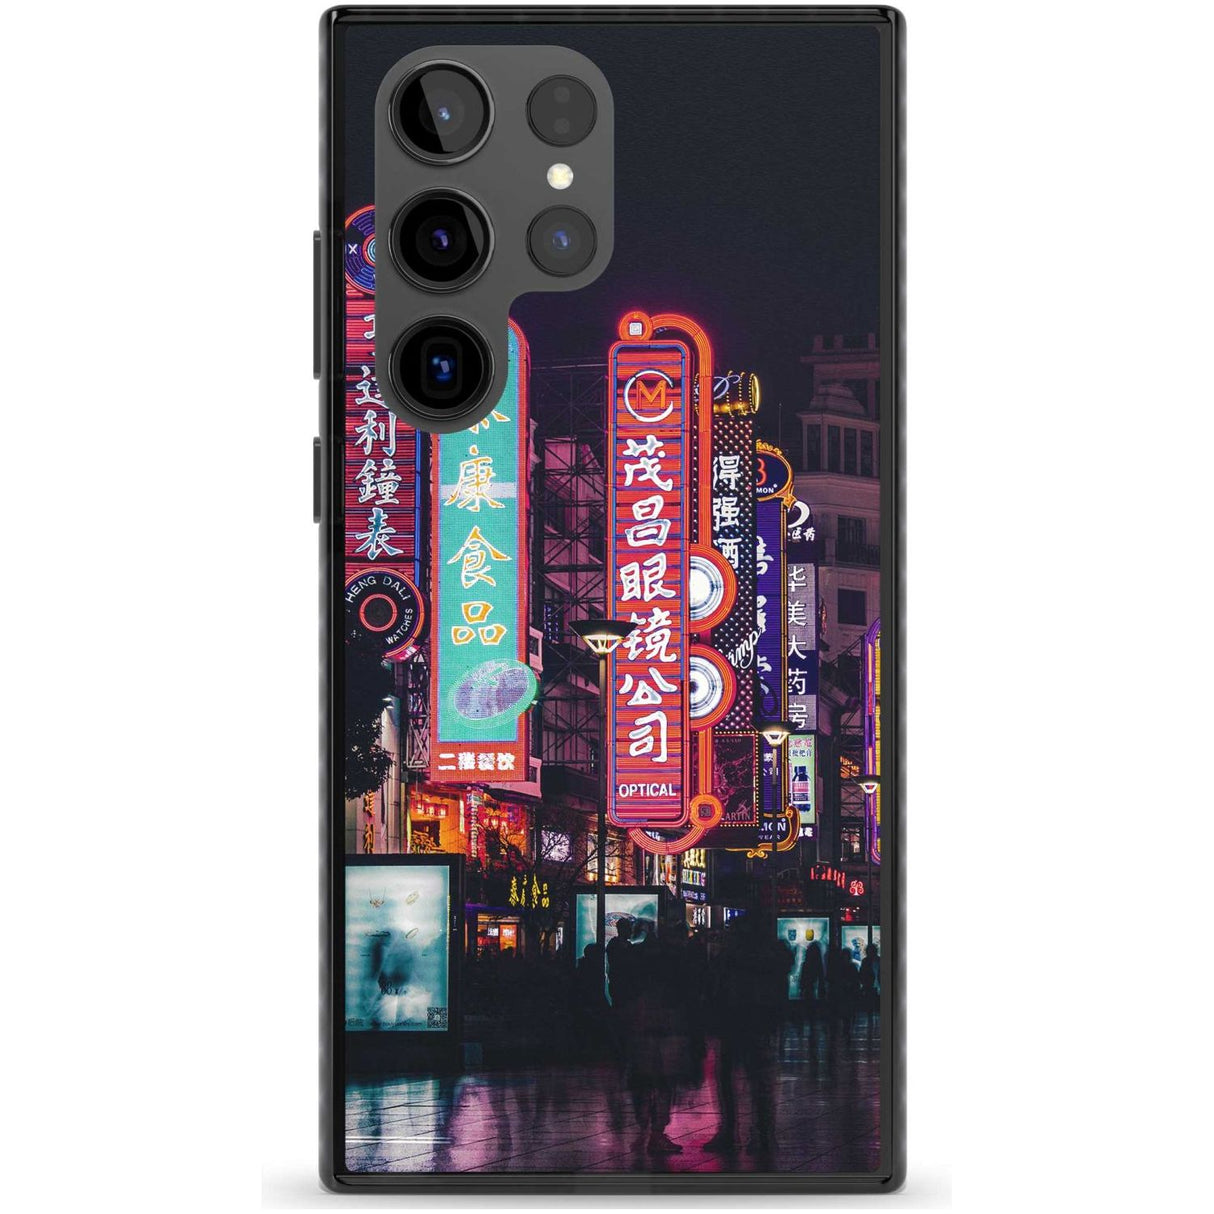 Busy Street - Neon Cities Photographs Phone Case Samsung S22 Ultra / Black Impact Case,Samsung S23 Ultra / Black Impact Case Blanc Space